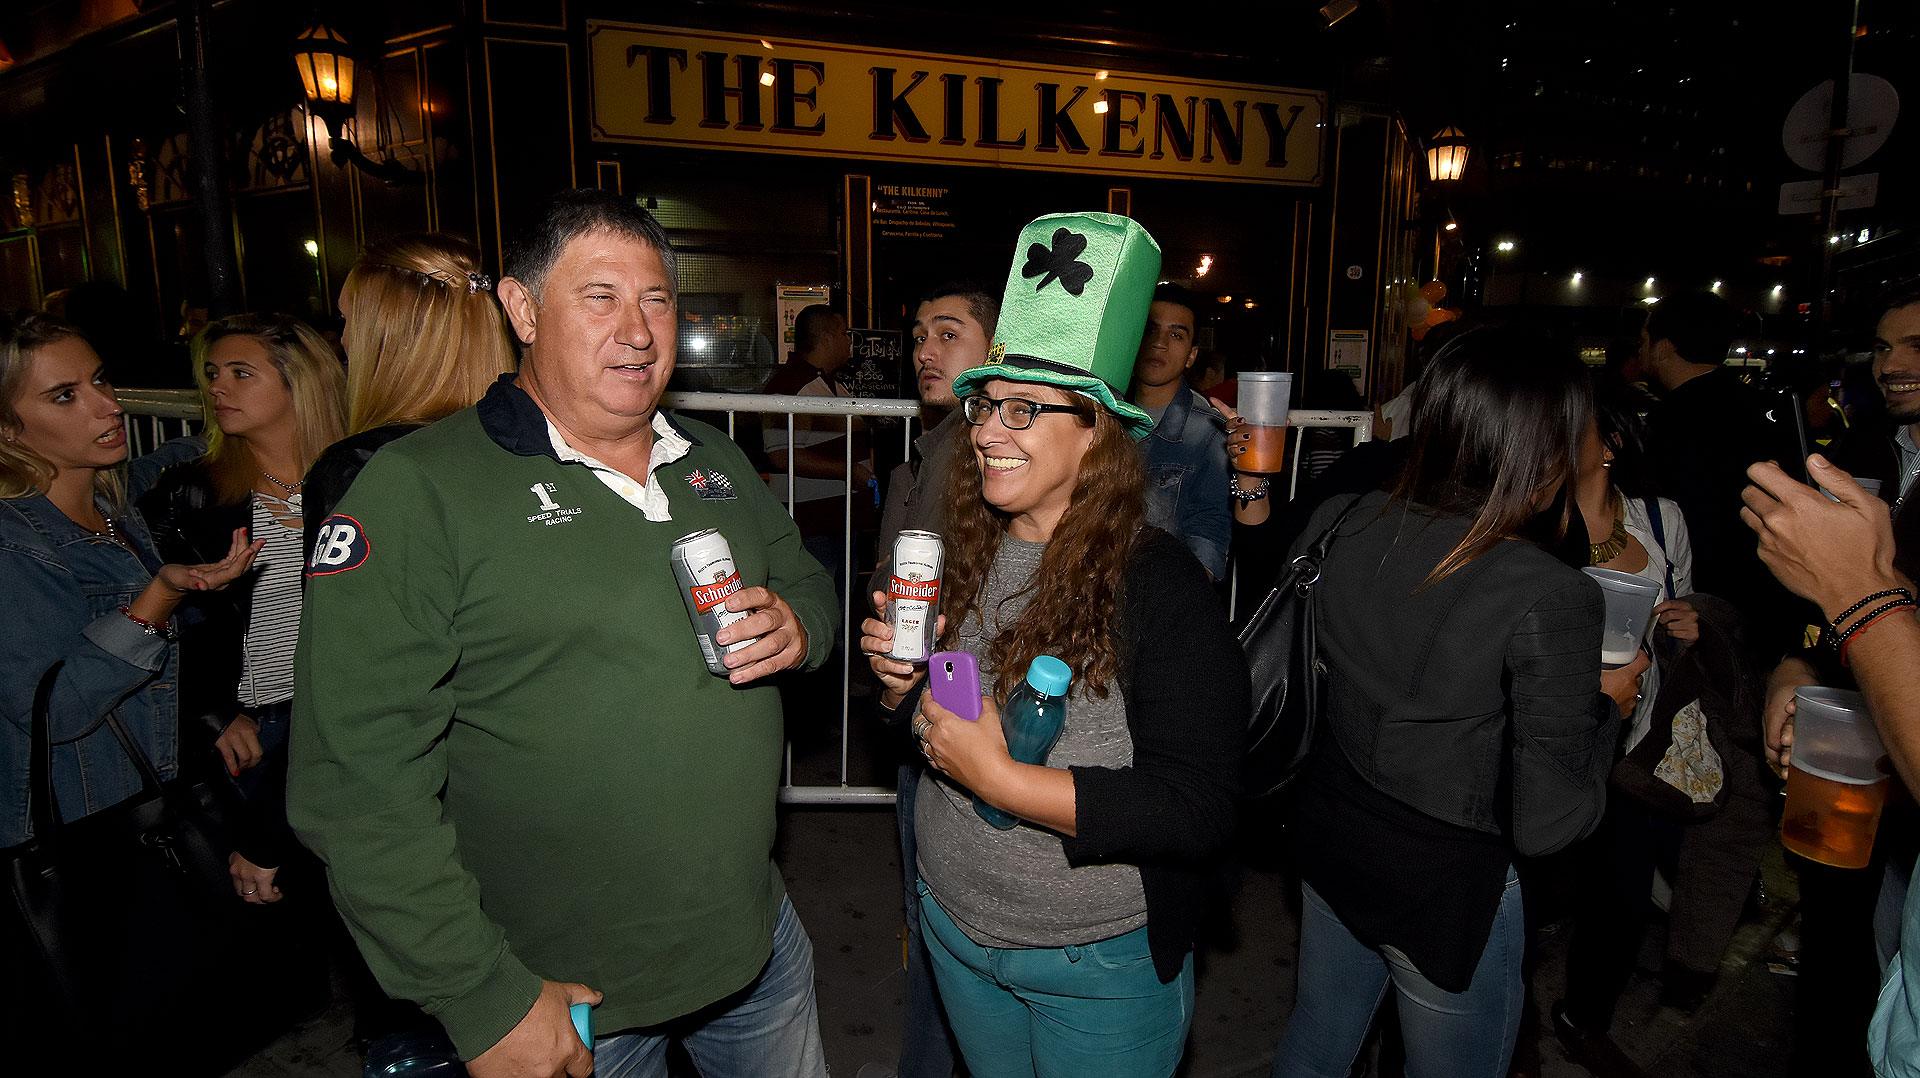 On Saint Patrick's Day it is customary to drink beer and wear green clothes (Nicolas Stulberg)